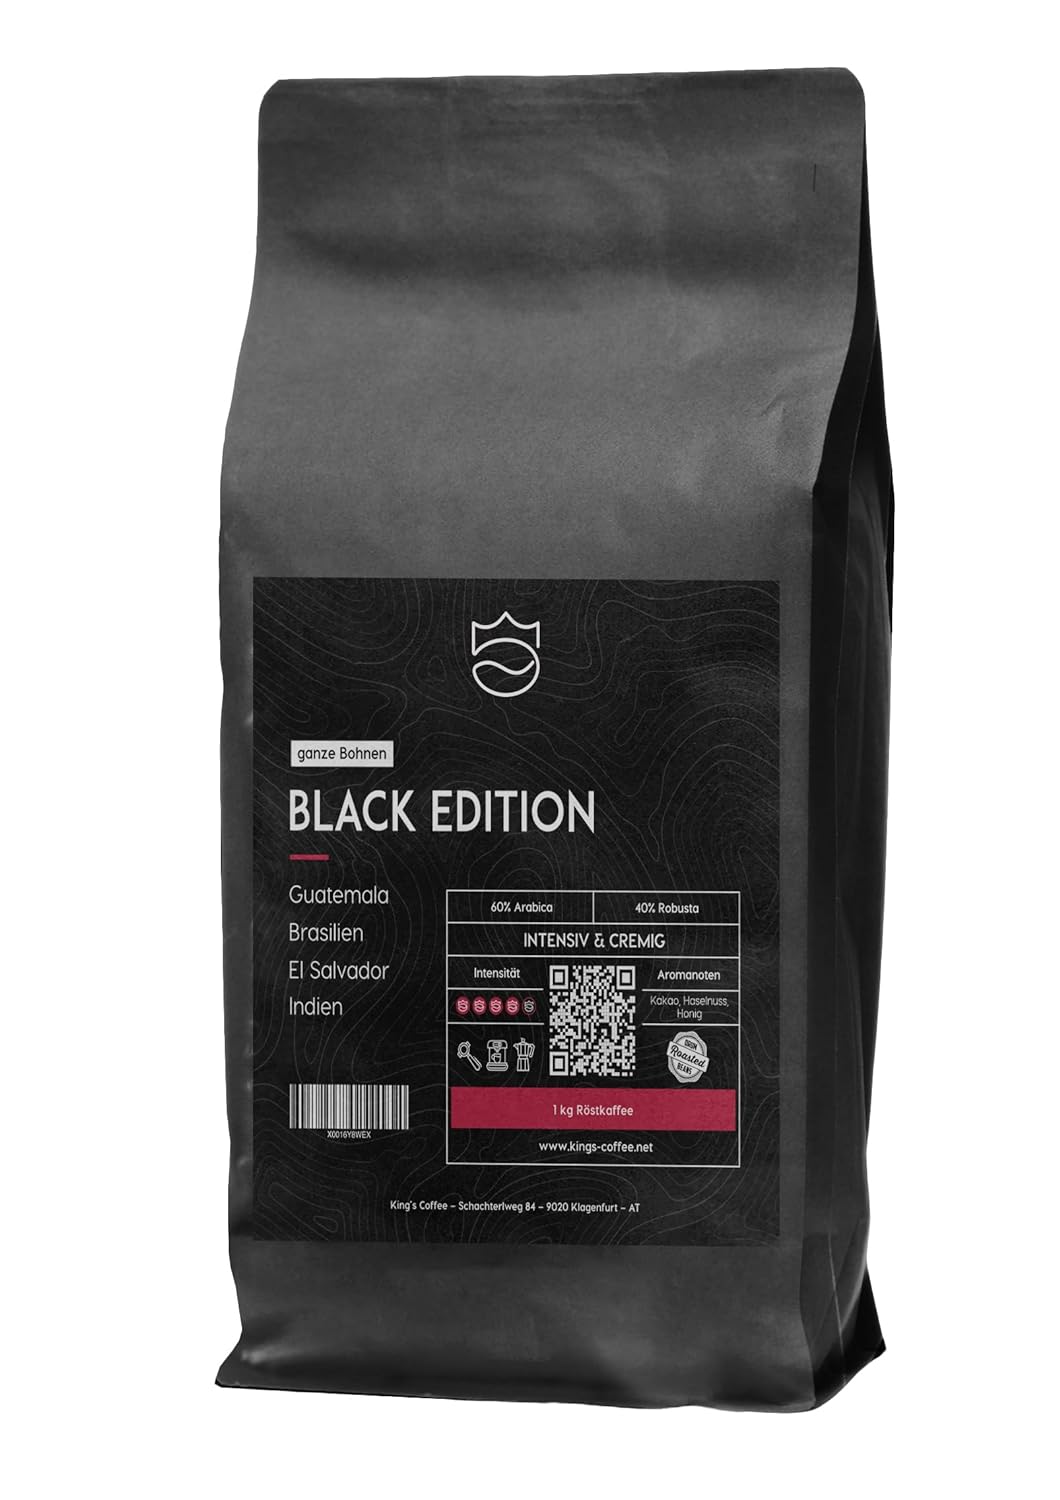 KING'S COFFEE - BLACK EDITION - Coffee beans Crema Intense - low acidity - small batch roast from Italy - strong Arabica-Robusta espresso blend for fully automatic machines & portafilters - 1kg
